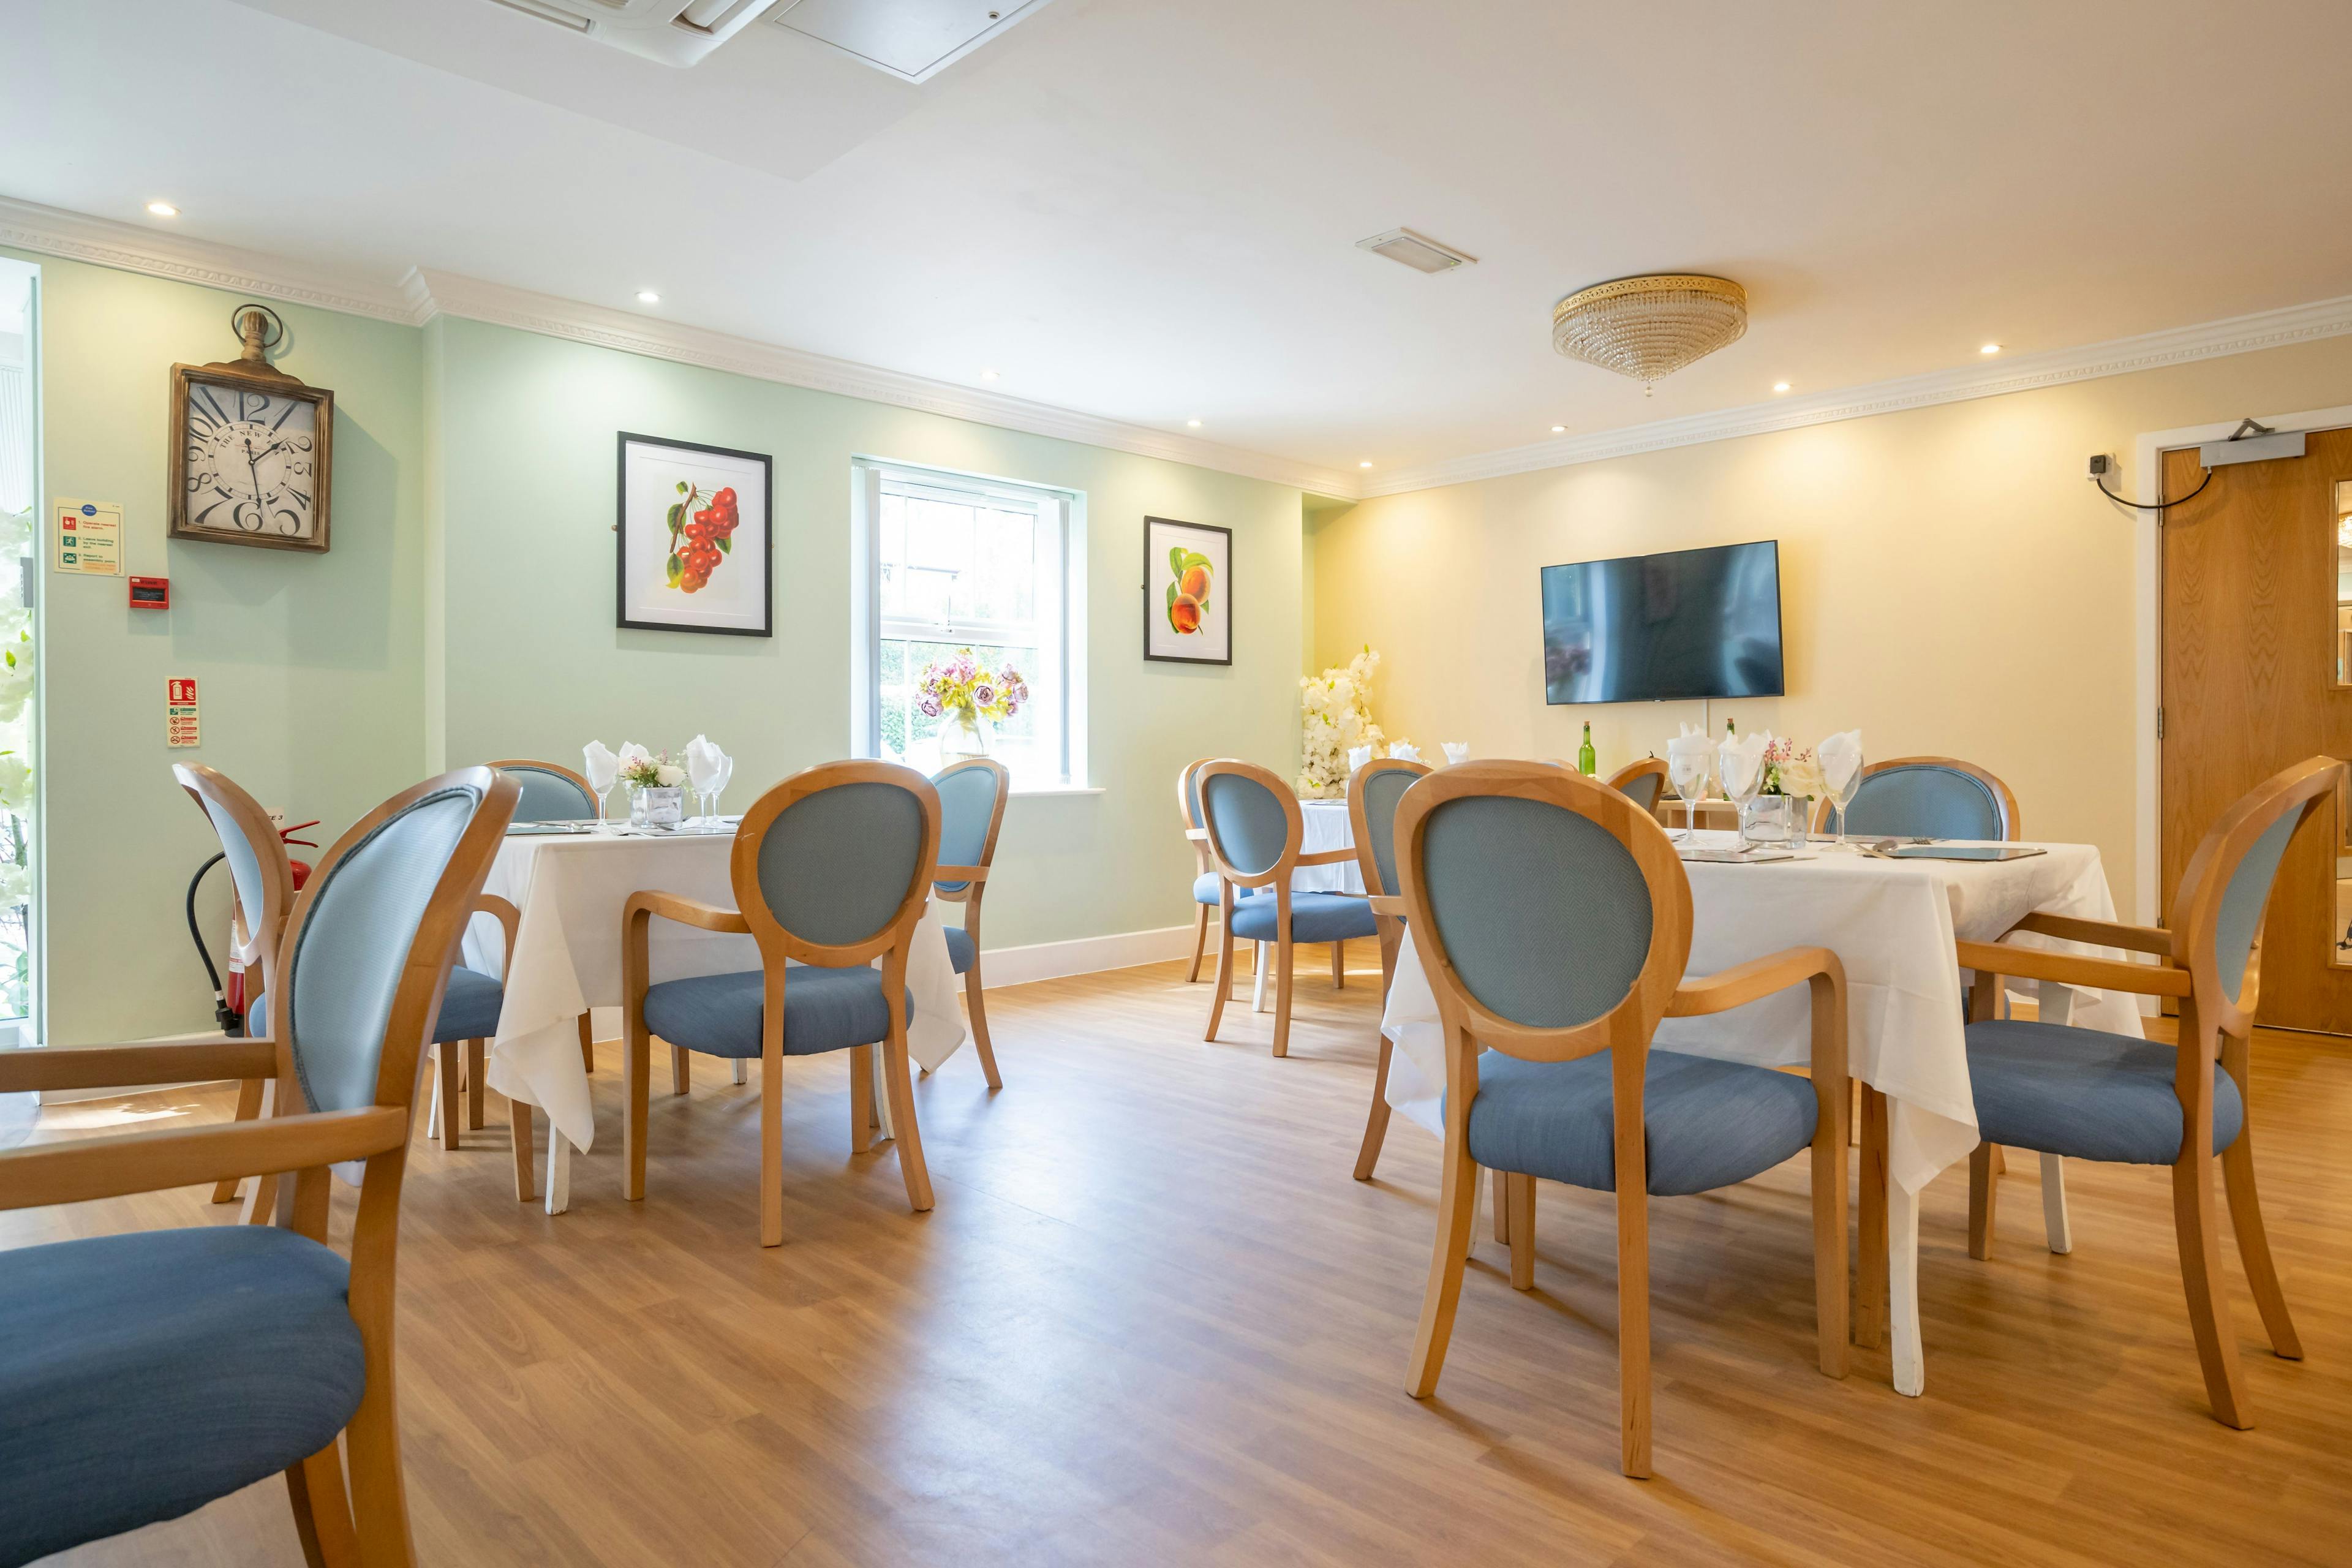 Dining area of Aranlow House Care Home in Poole, Dorset